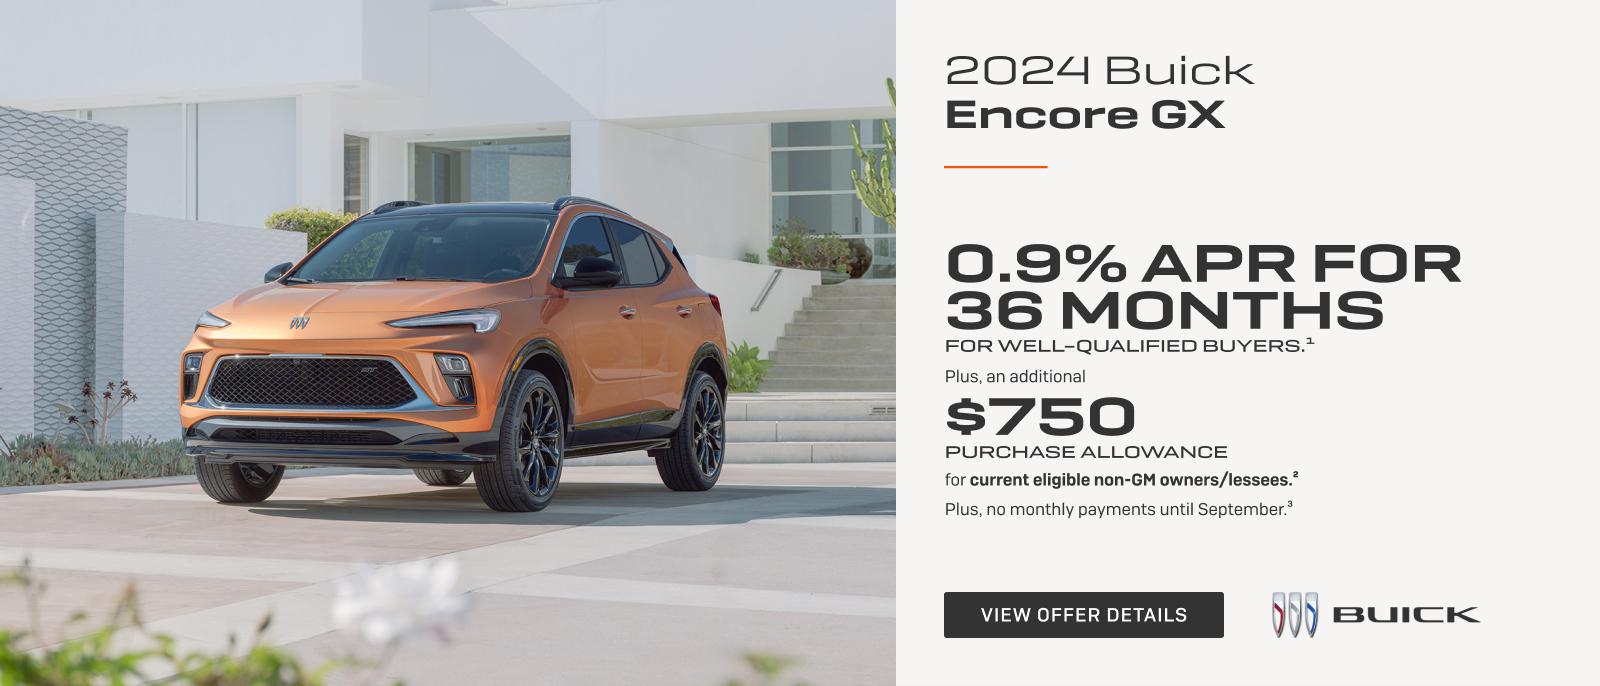 0.9% APR FOR 36 MONTHS 
FOR WELL-QUALIFIED BUYERS.1

Plus, an additional $750 PURCHASE ALLOWANCE for current eligible non-GM owners/lessees.2

Plus, no monthly payments until September. 3